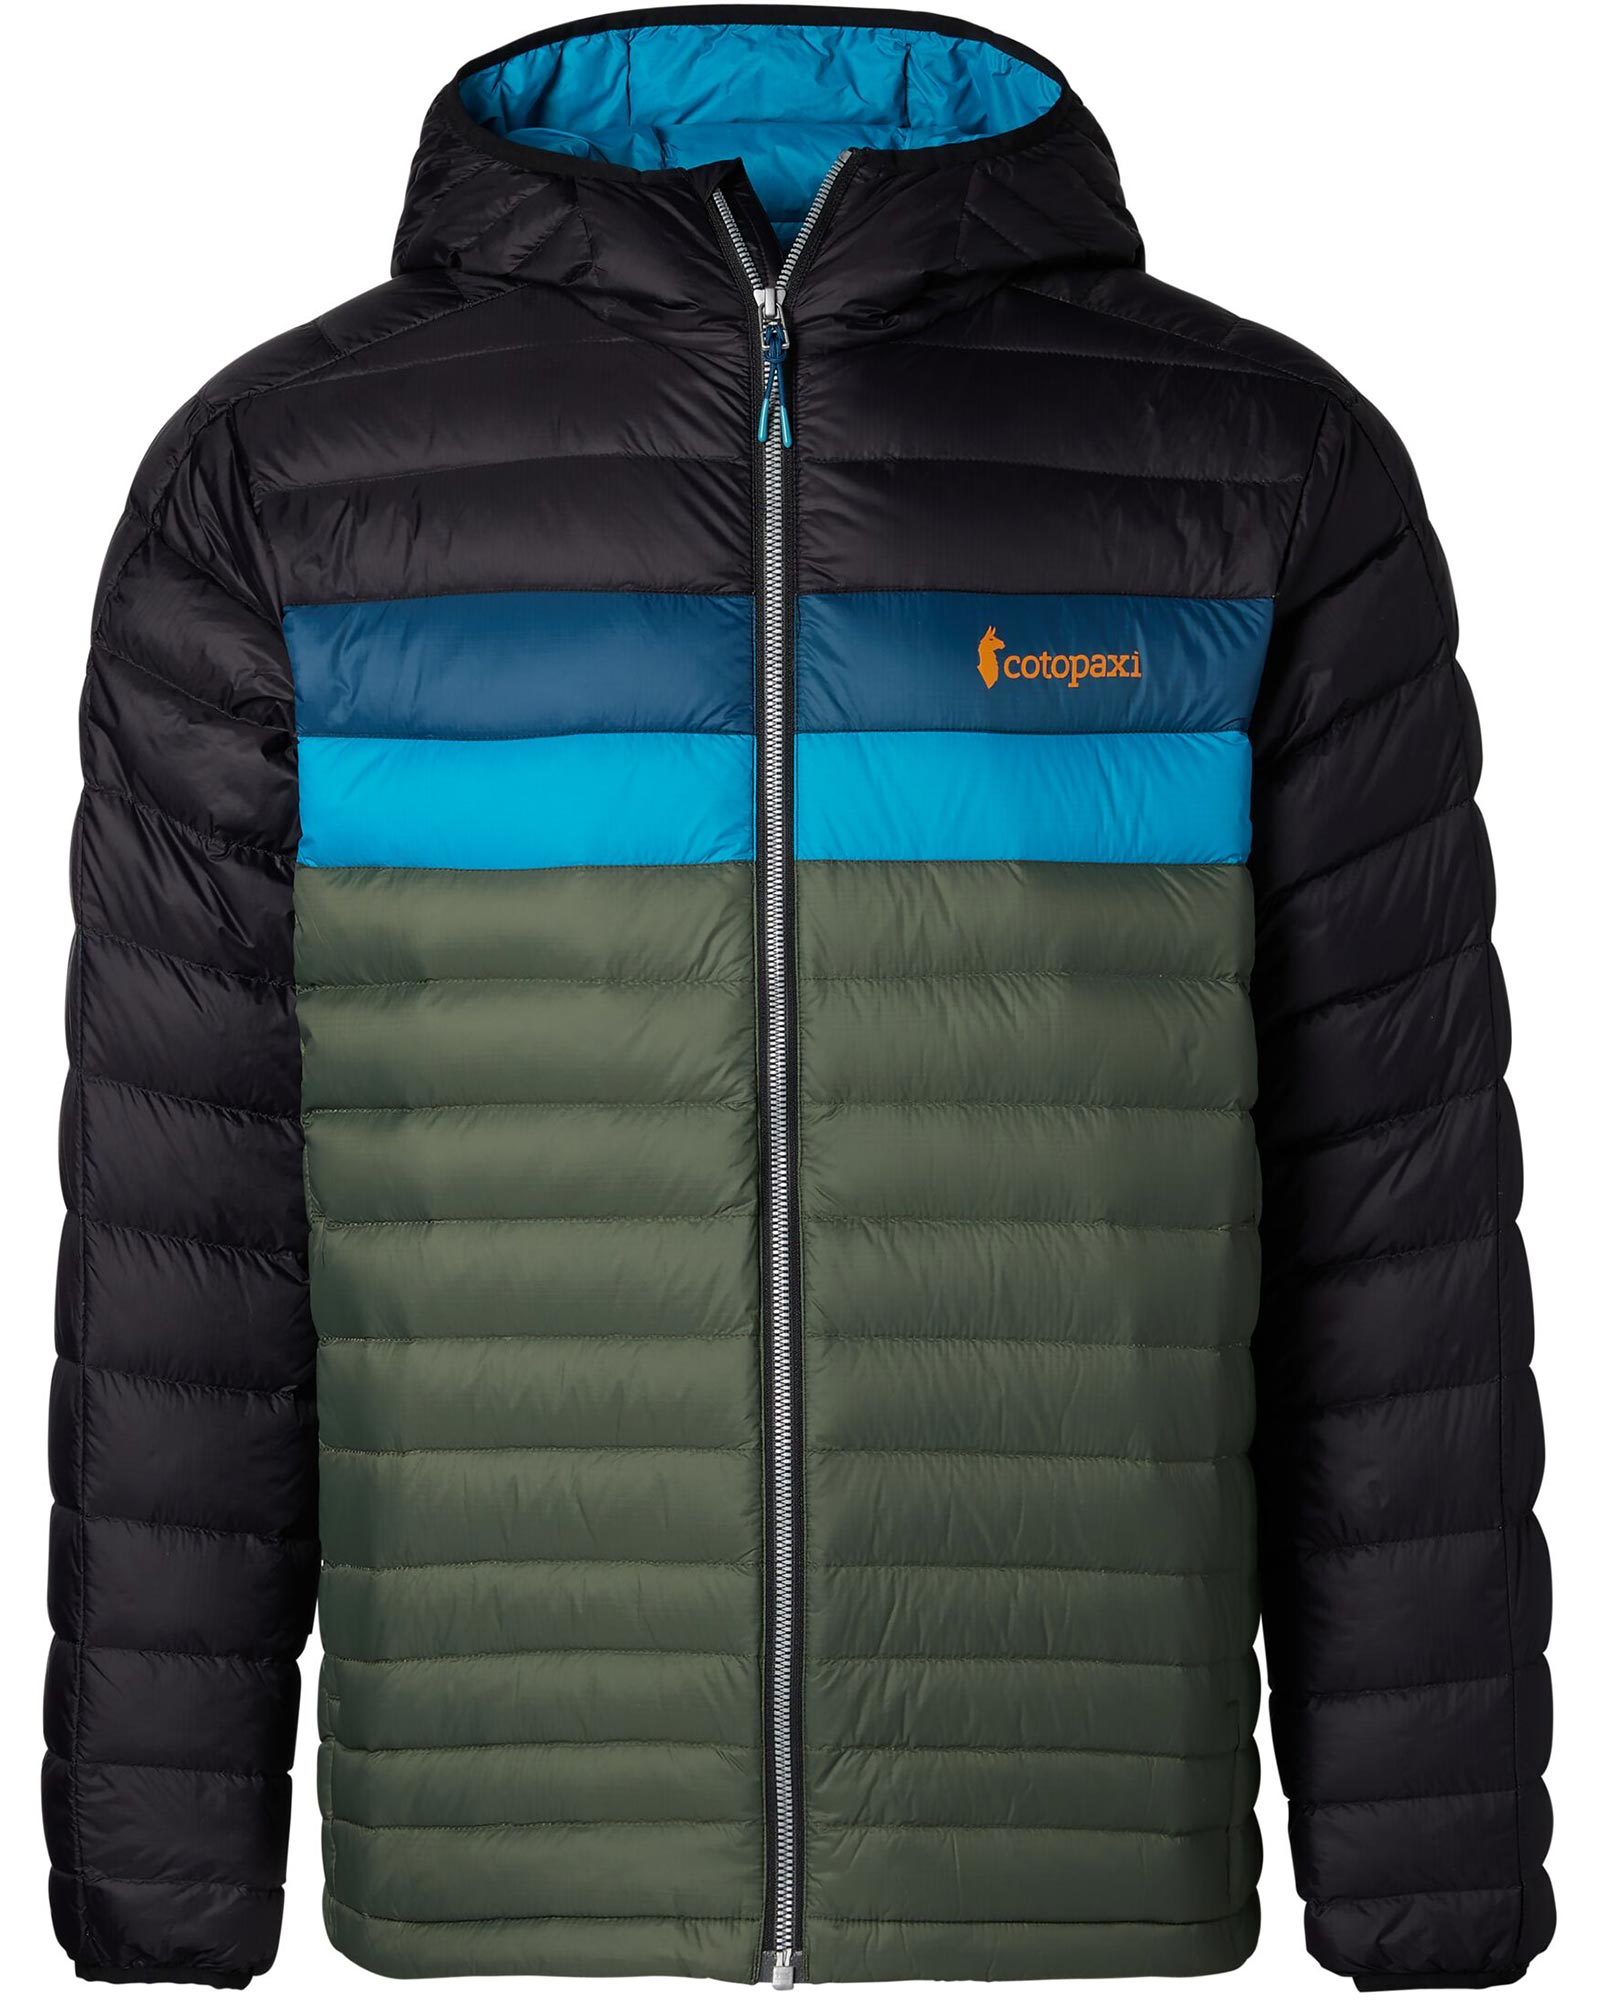 Cotopaxi Fuego Hooded Men’s Down Jacket - Black/Spruce L